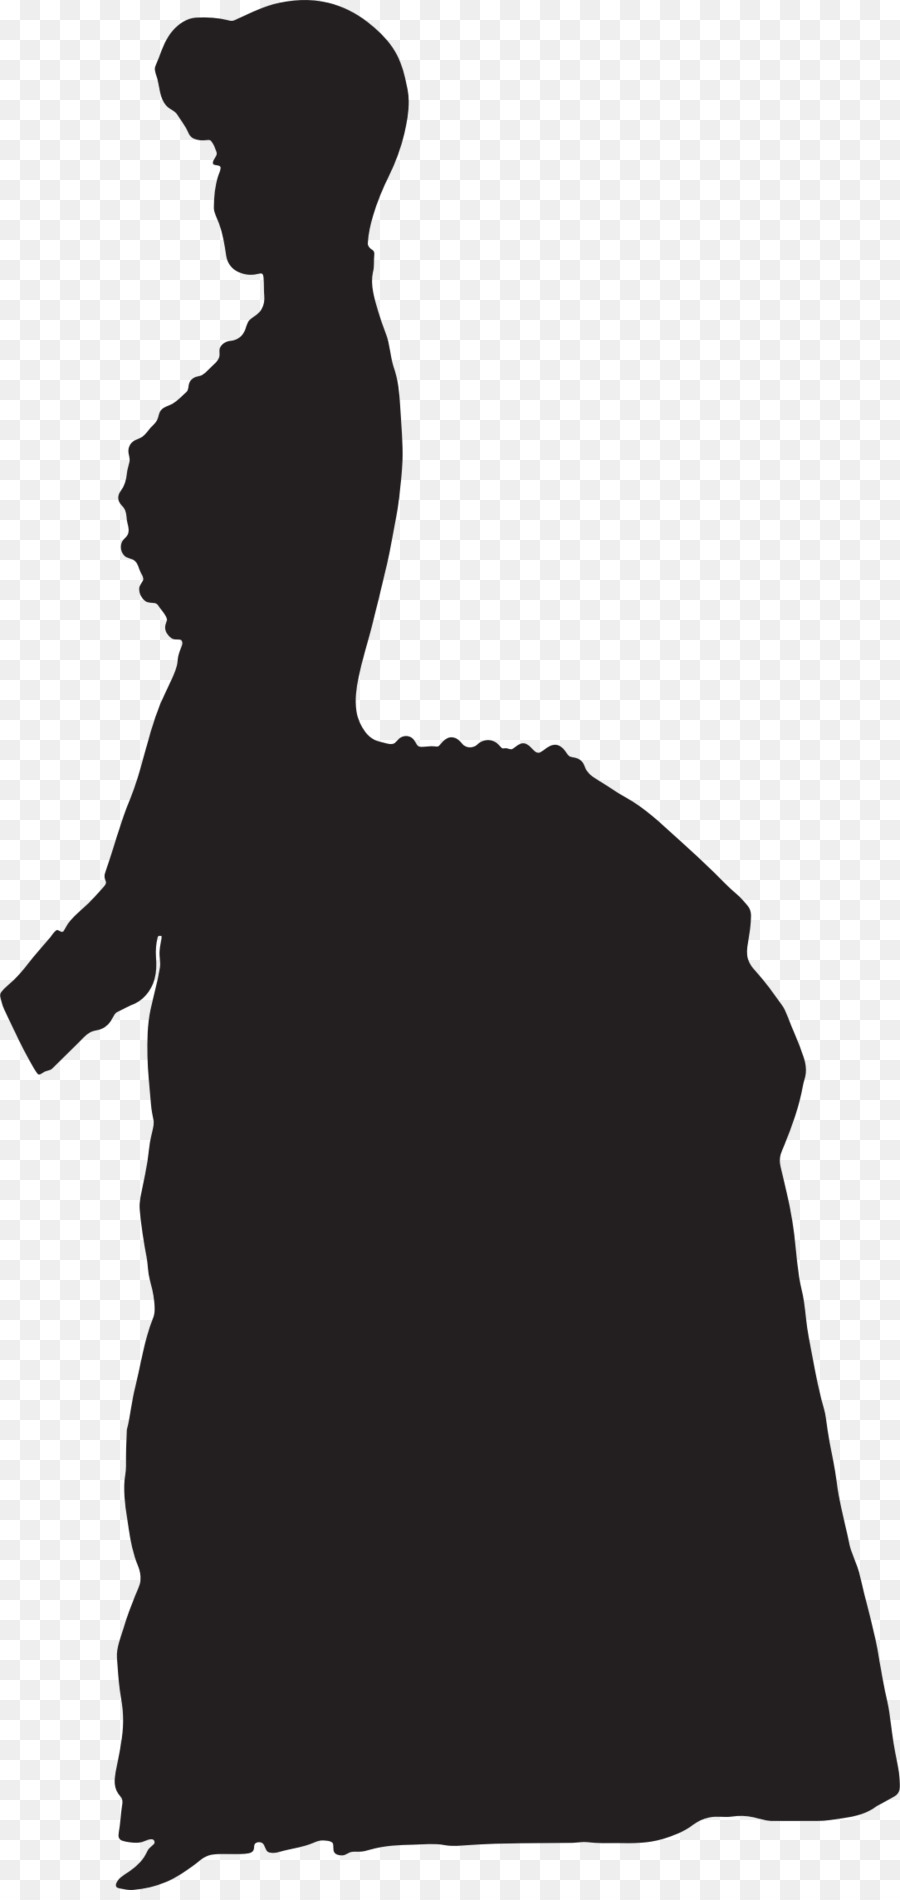 Silhouette Woman Victorian era - Old Time png download - 1084*2276 - Free Transparent Silhouette png Download.